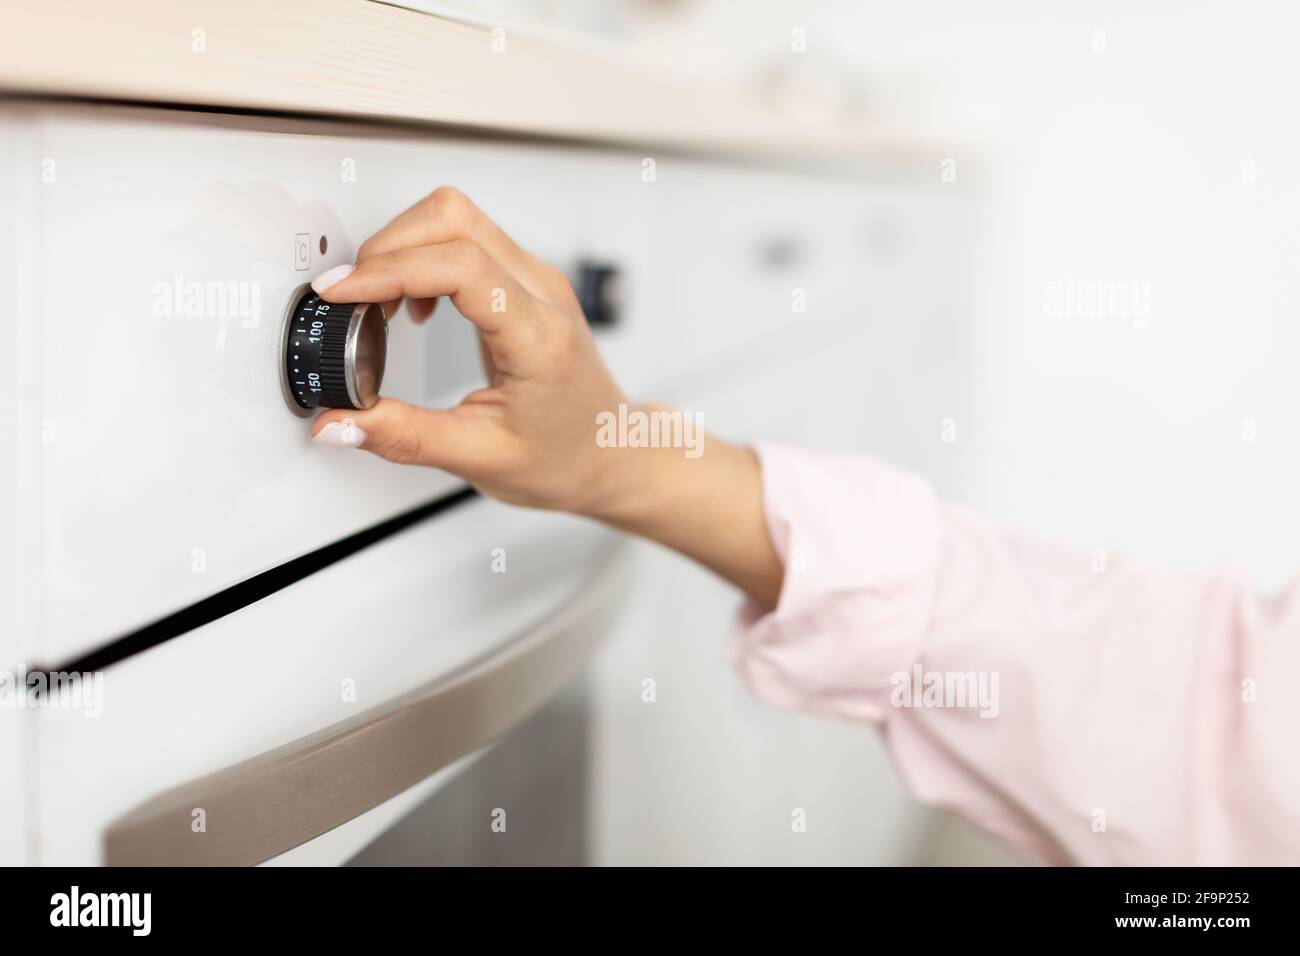 Woman using stove cooking food in kitchen Stock Photo